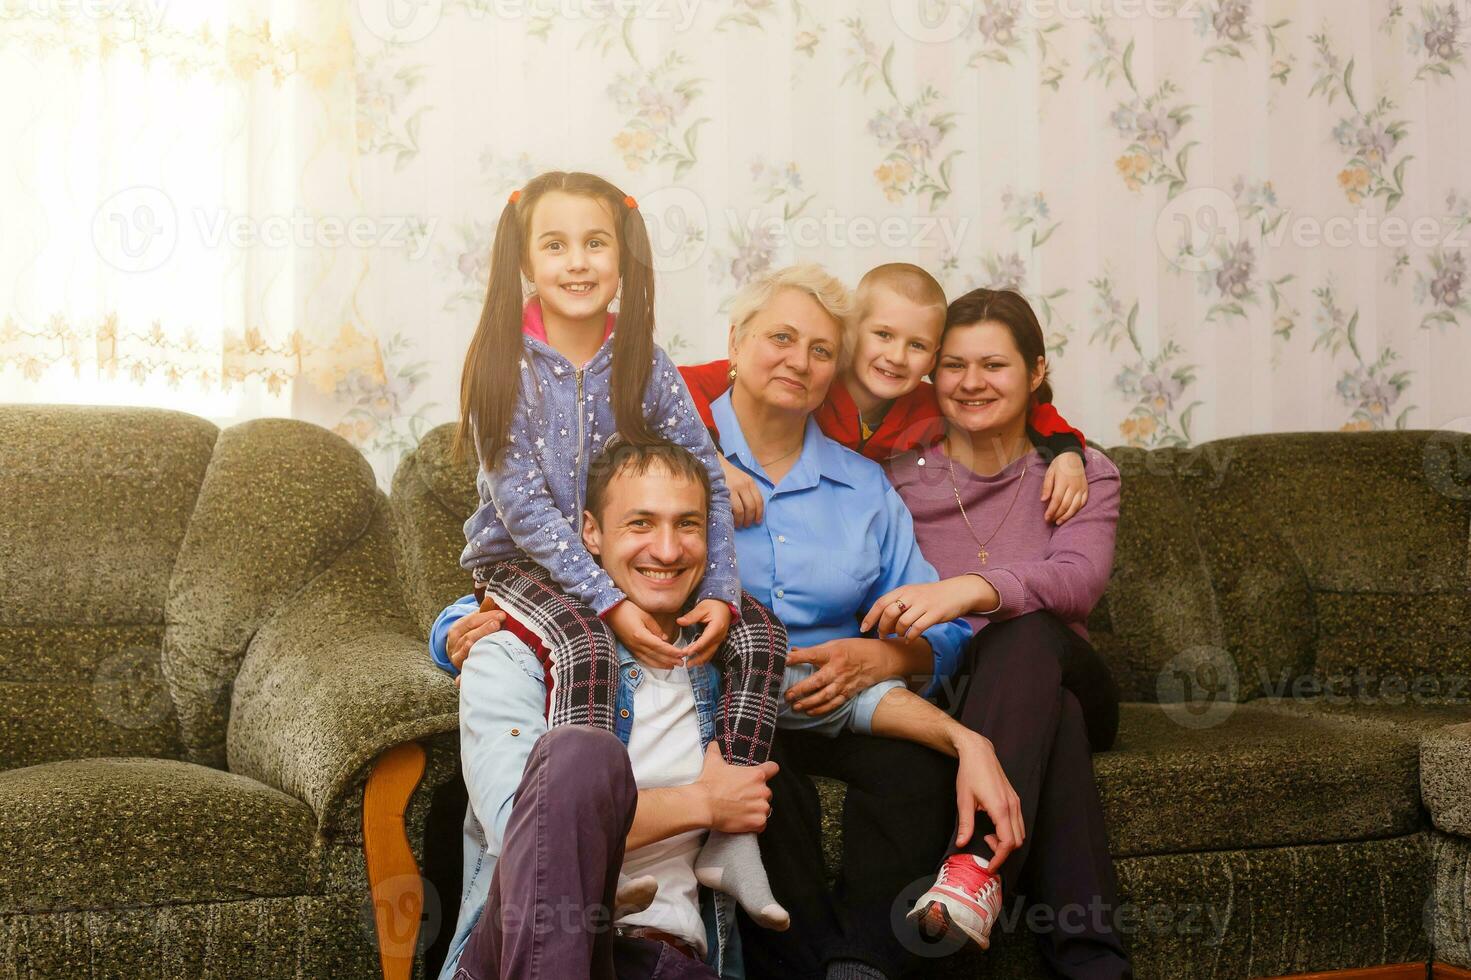 Grown up adult smiling grandchildren embraces elderly grandmother glad to see missing her, visit of loving relatives enjoy communication, cuddle as symbol of connection, love and support concept photo